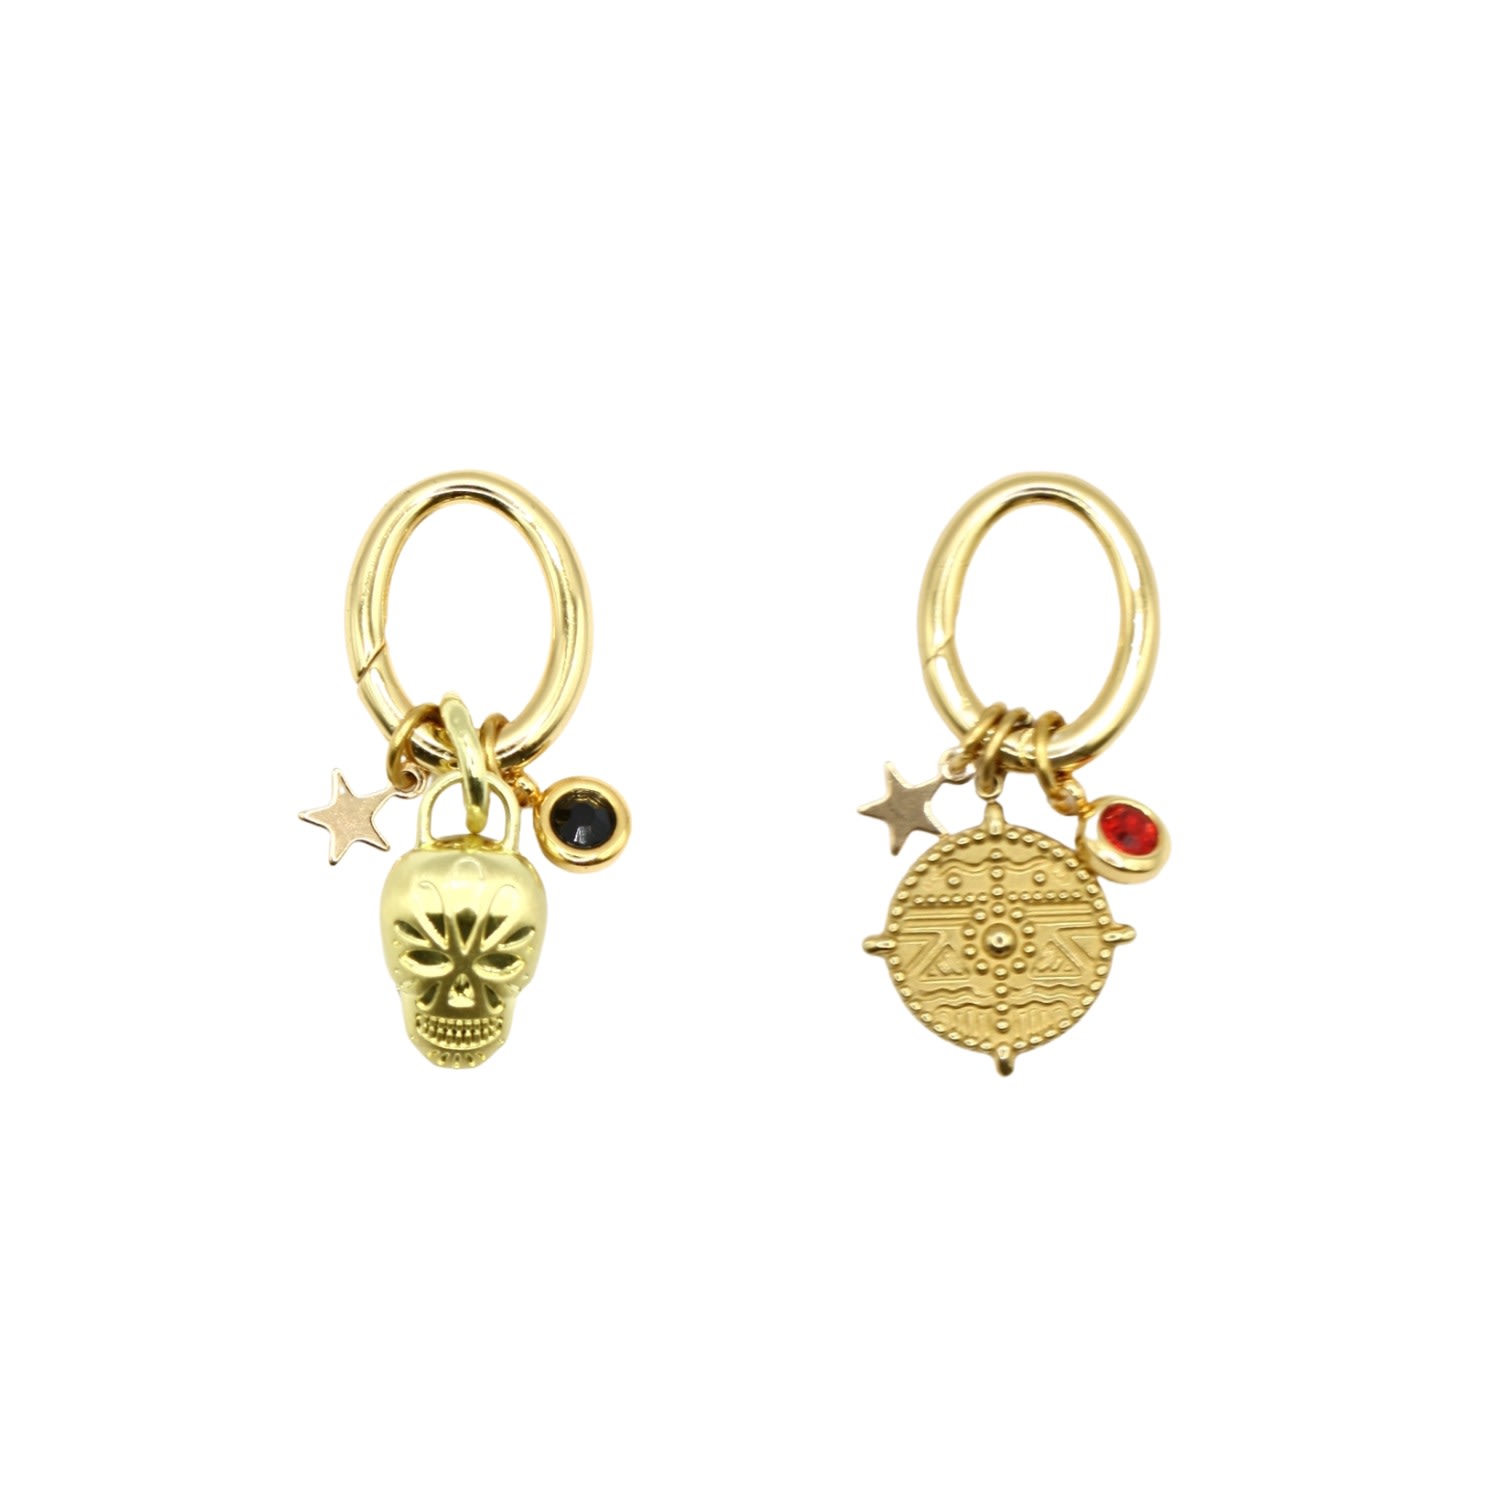 The Elsewhere Co. Accessories - Gold Handbag Charm Set - Red